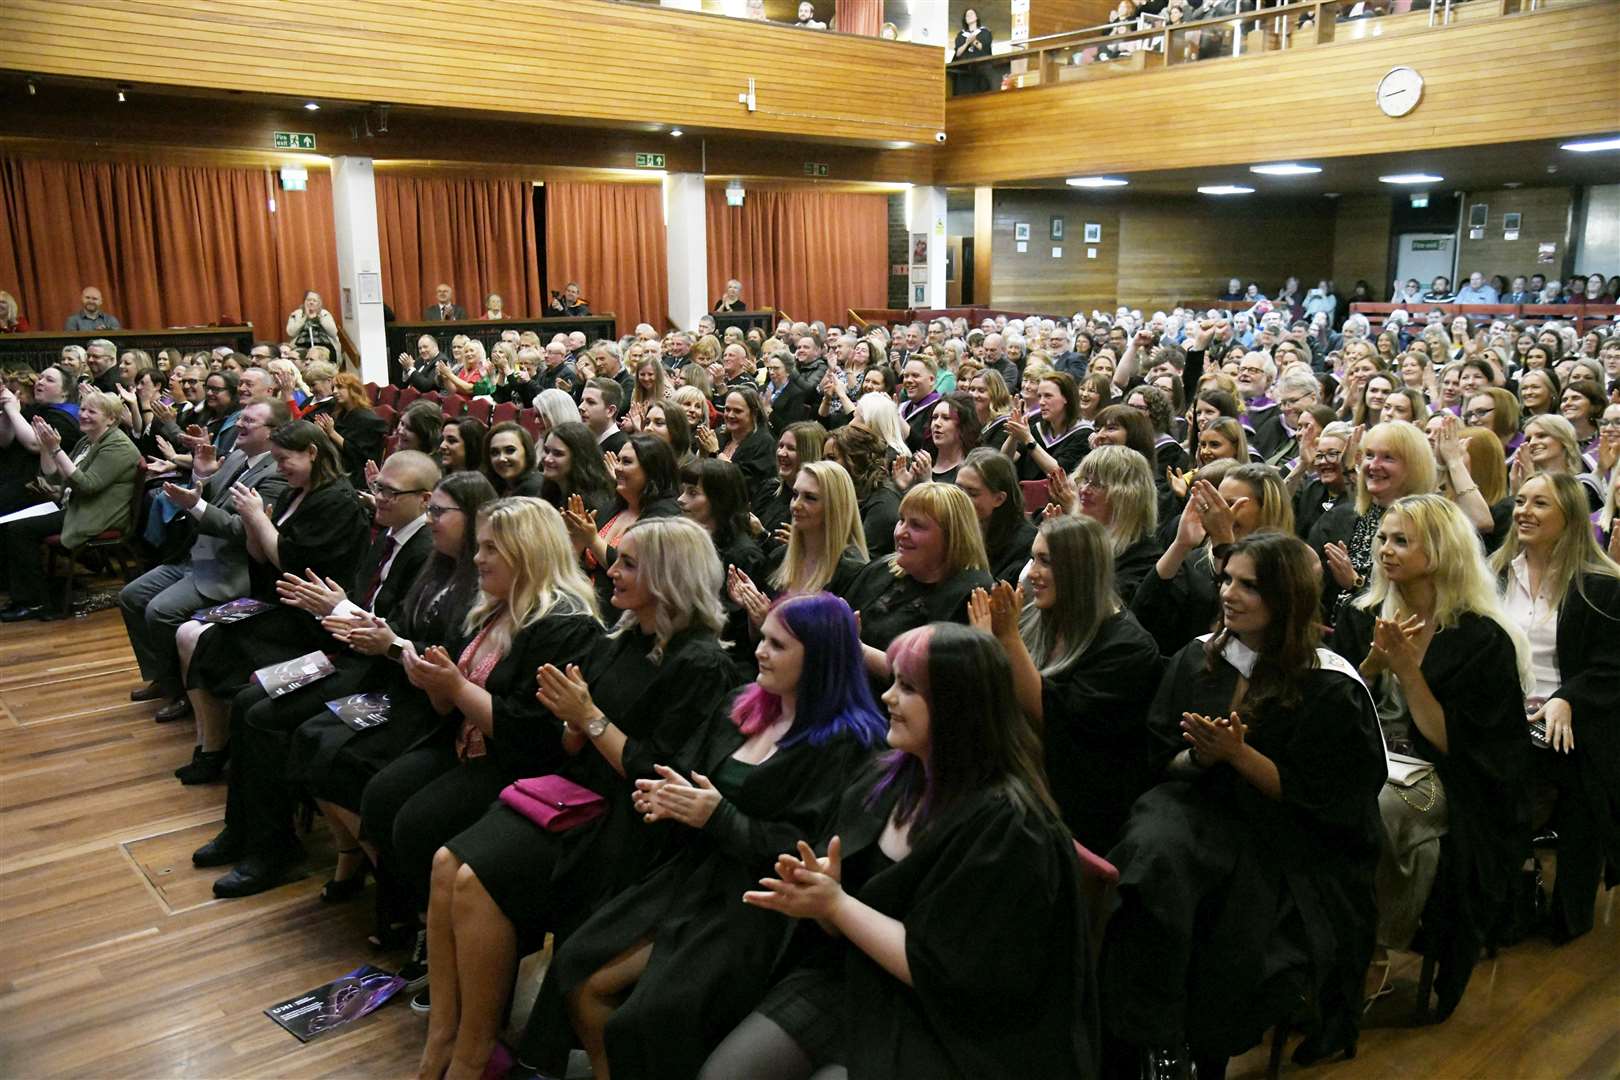 University of Highlands and Islands Graduation ceremony at Elgin Town Hall, October 6...Picture: Beth Taylor.